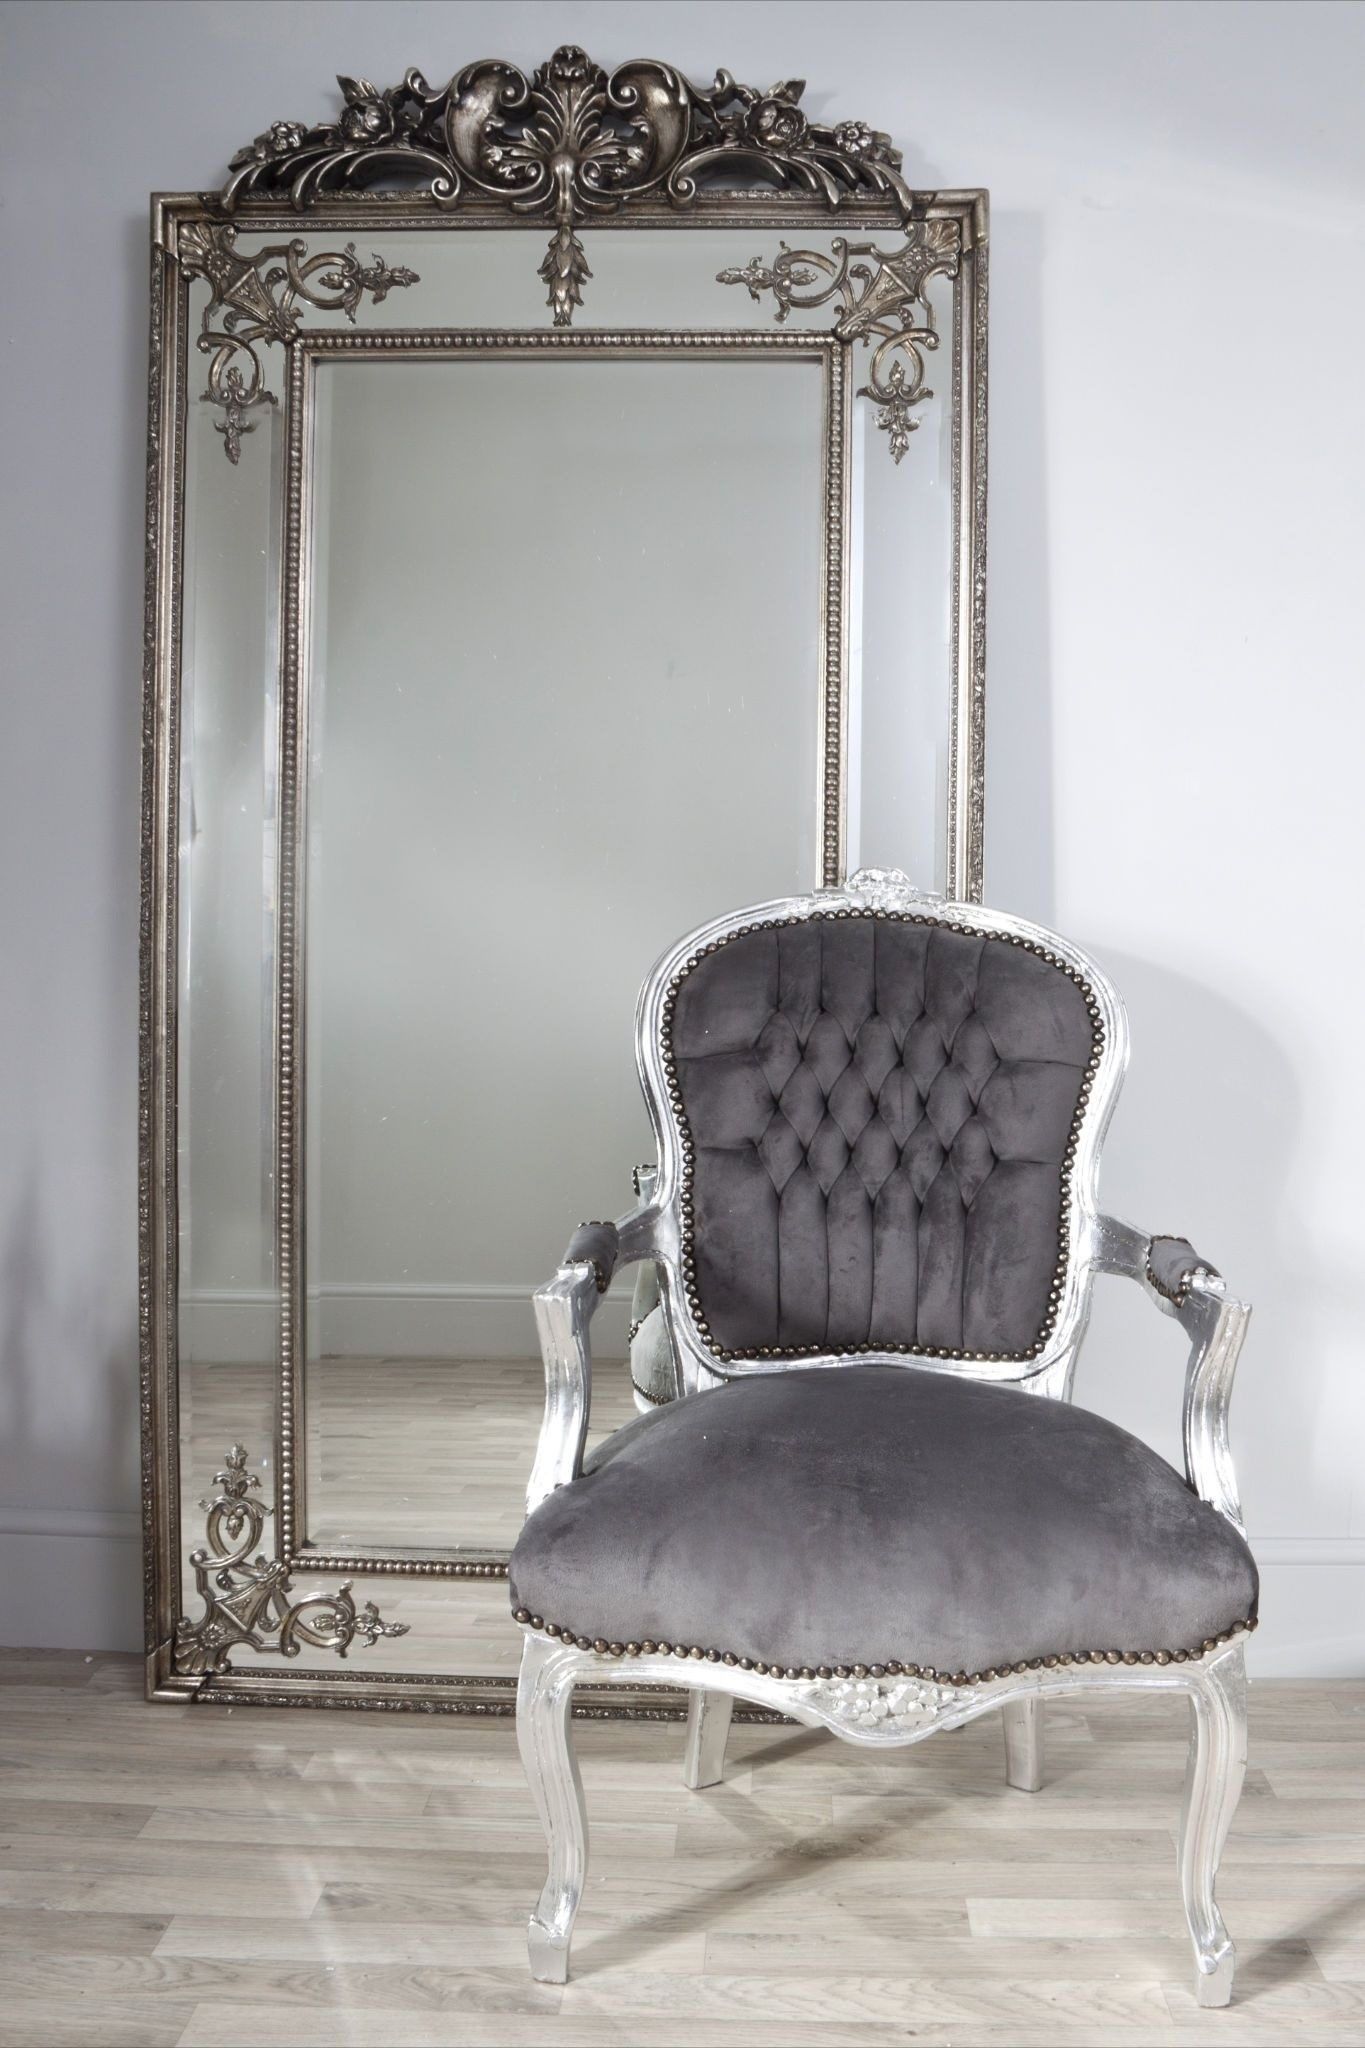 Vintage Floor Mirrors: Reflections Of Timeless Elegance